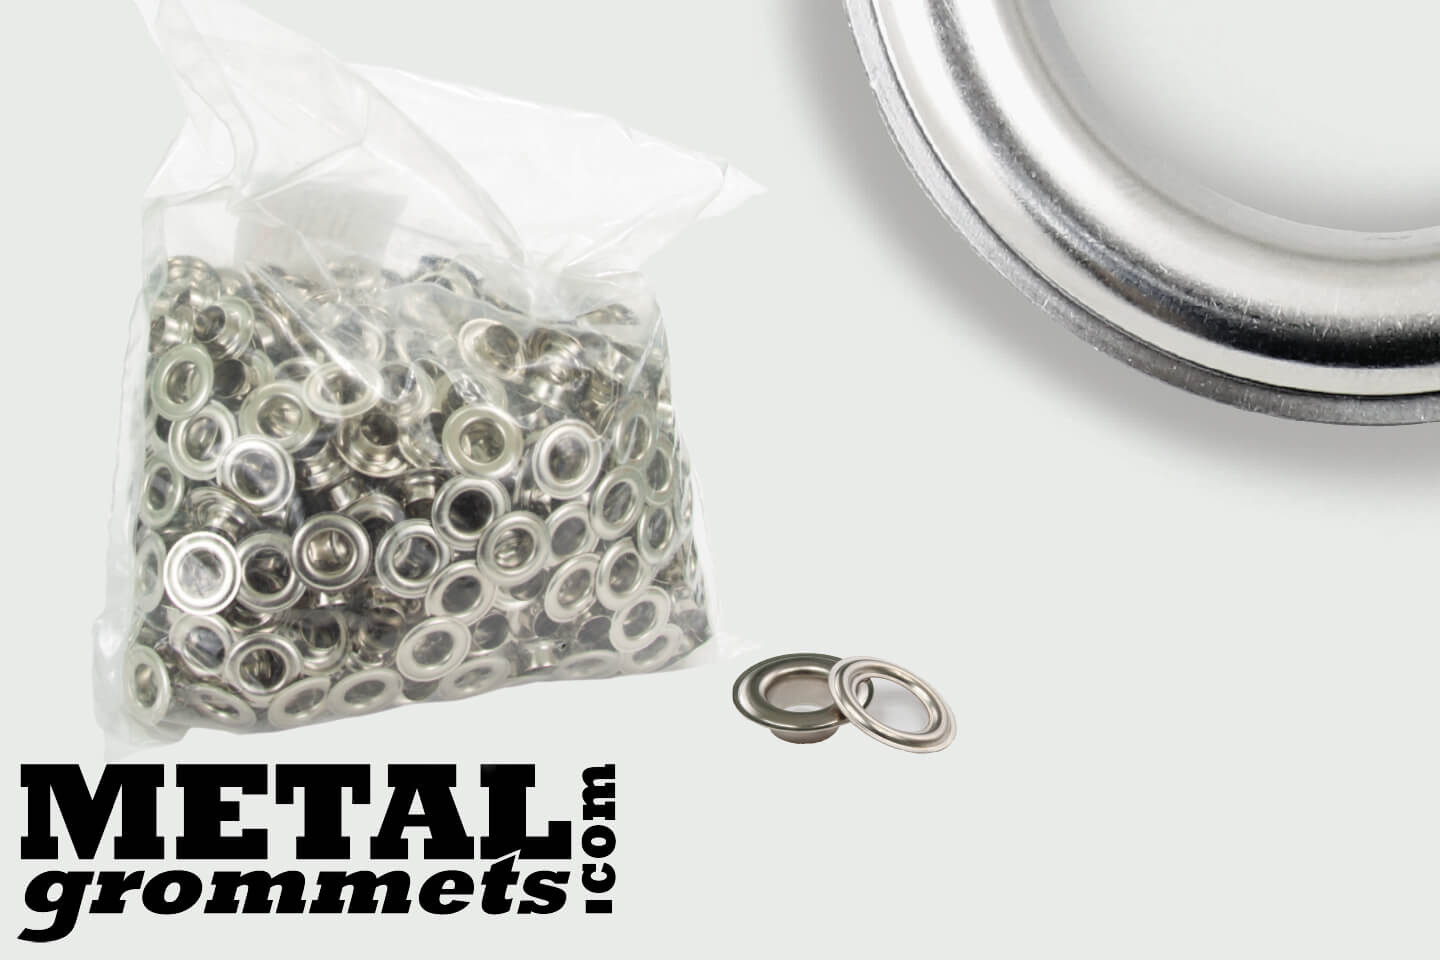 #2 (3/8 - 0.375 Hole Size) Nickel Plated Grommets & Washers